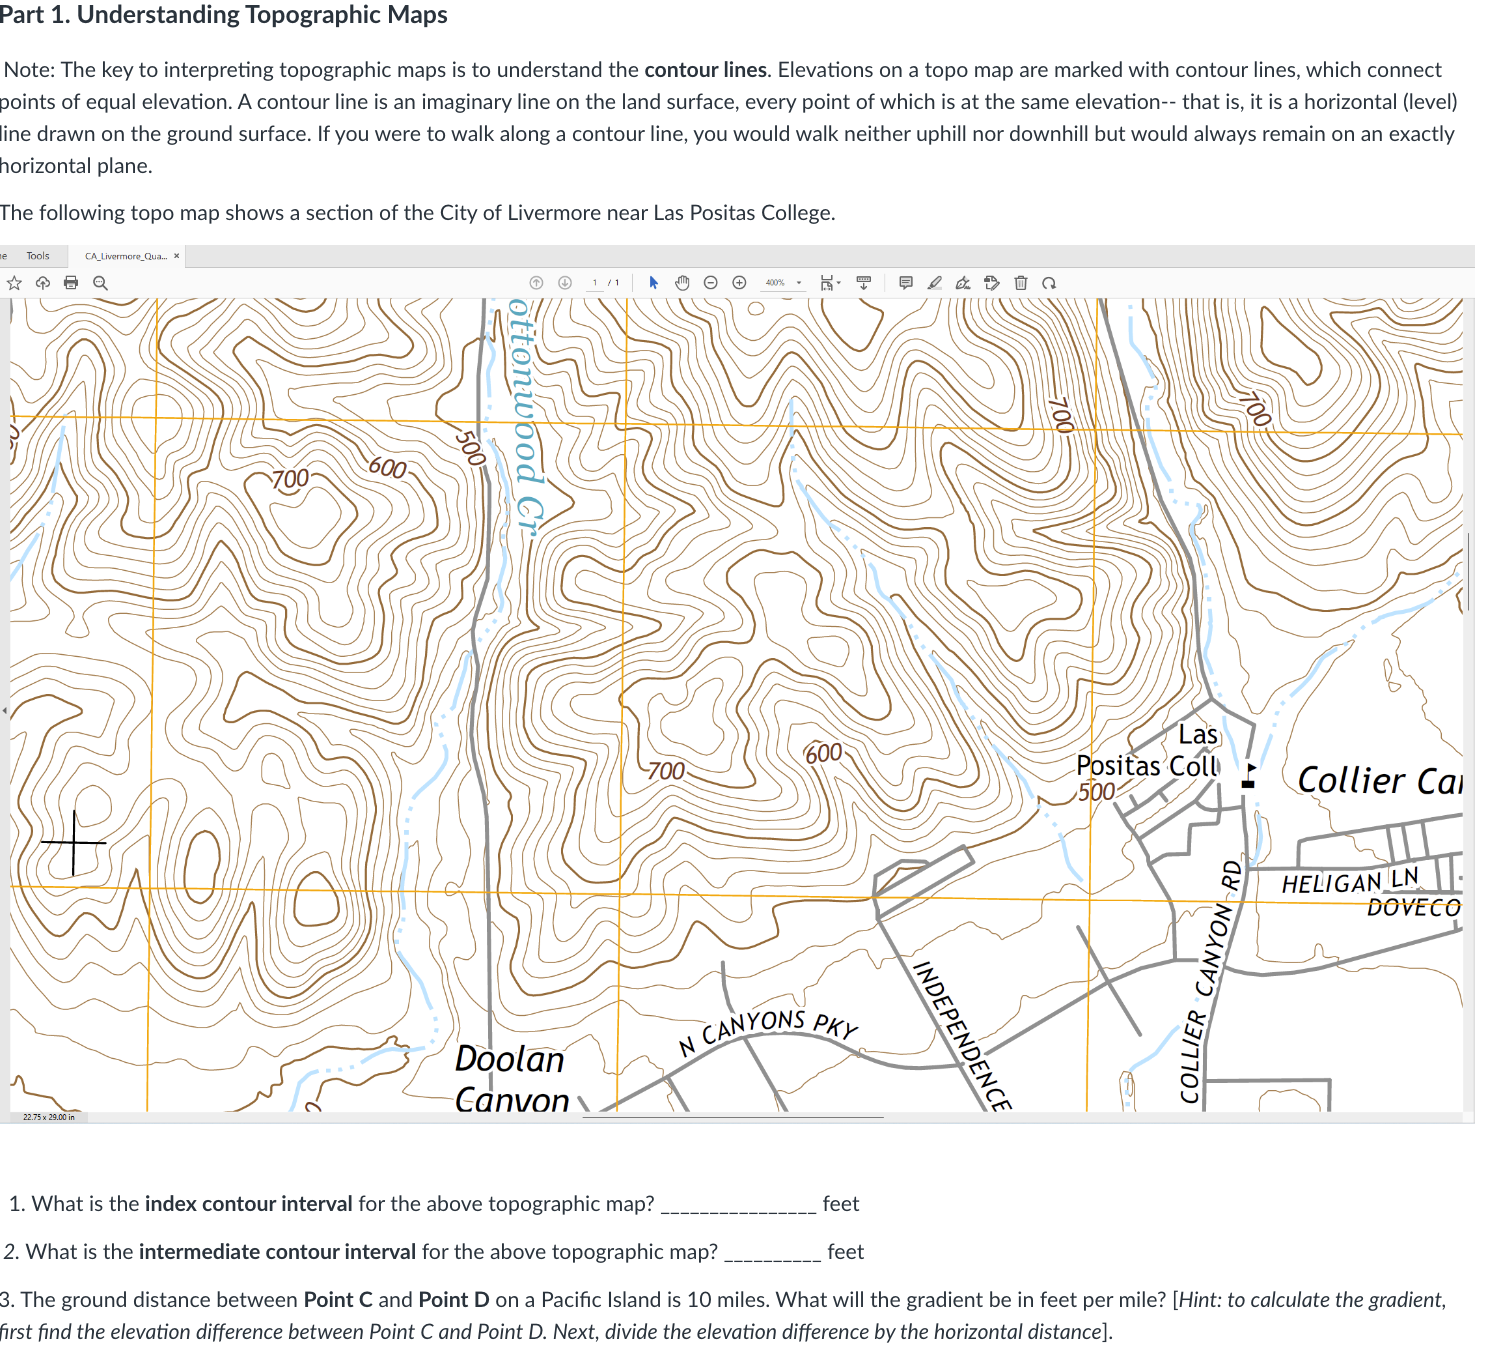 Comparison of the original contour lines to the contour lines from the